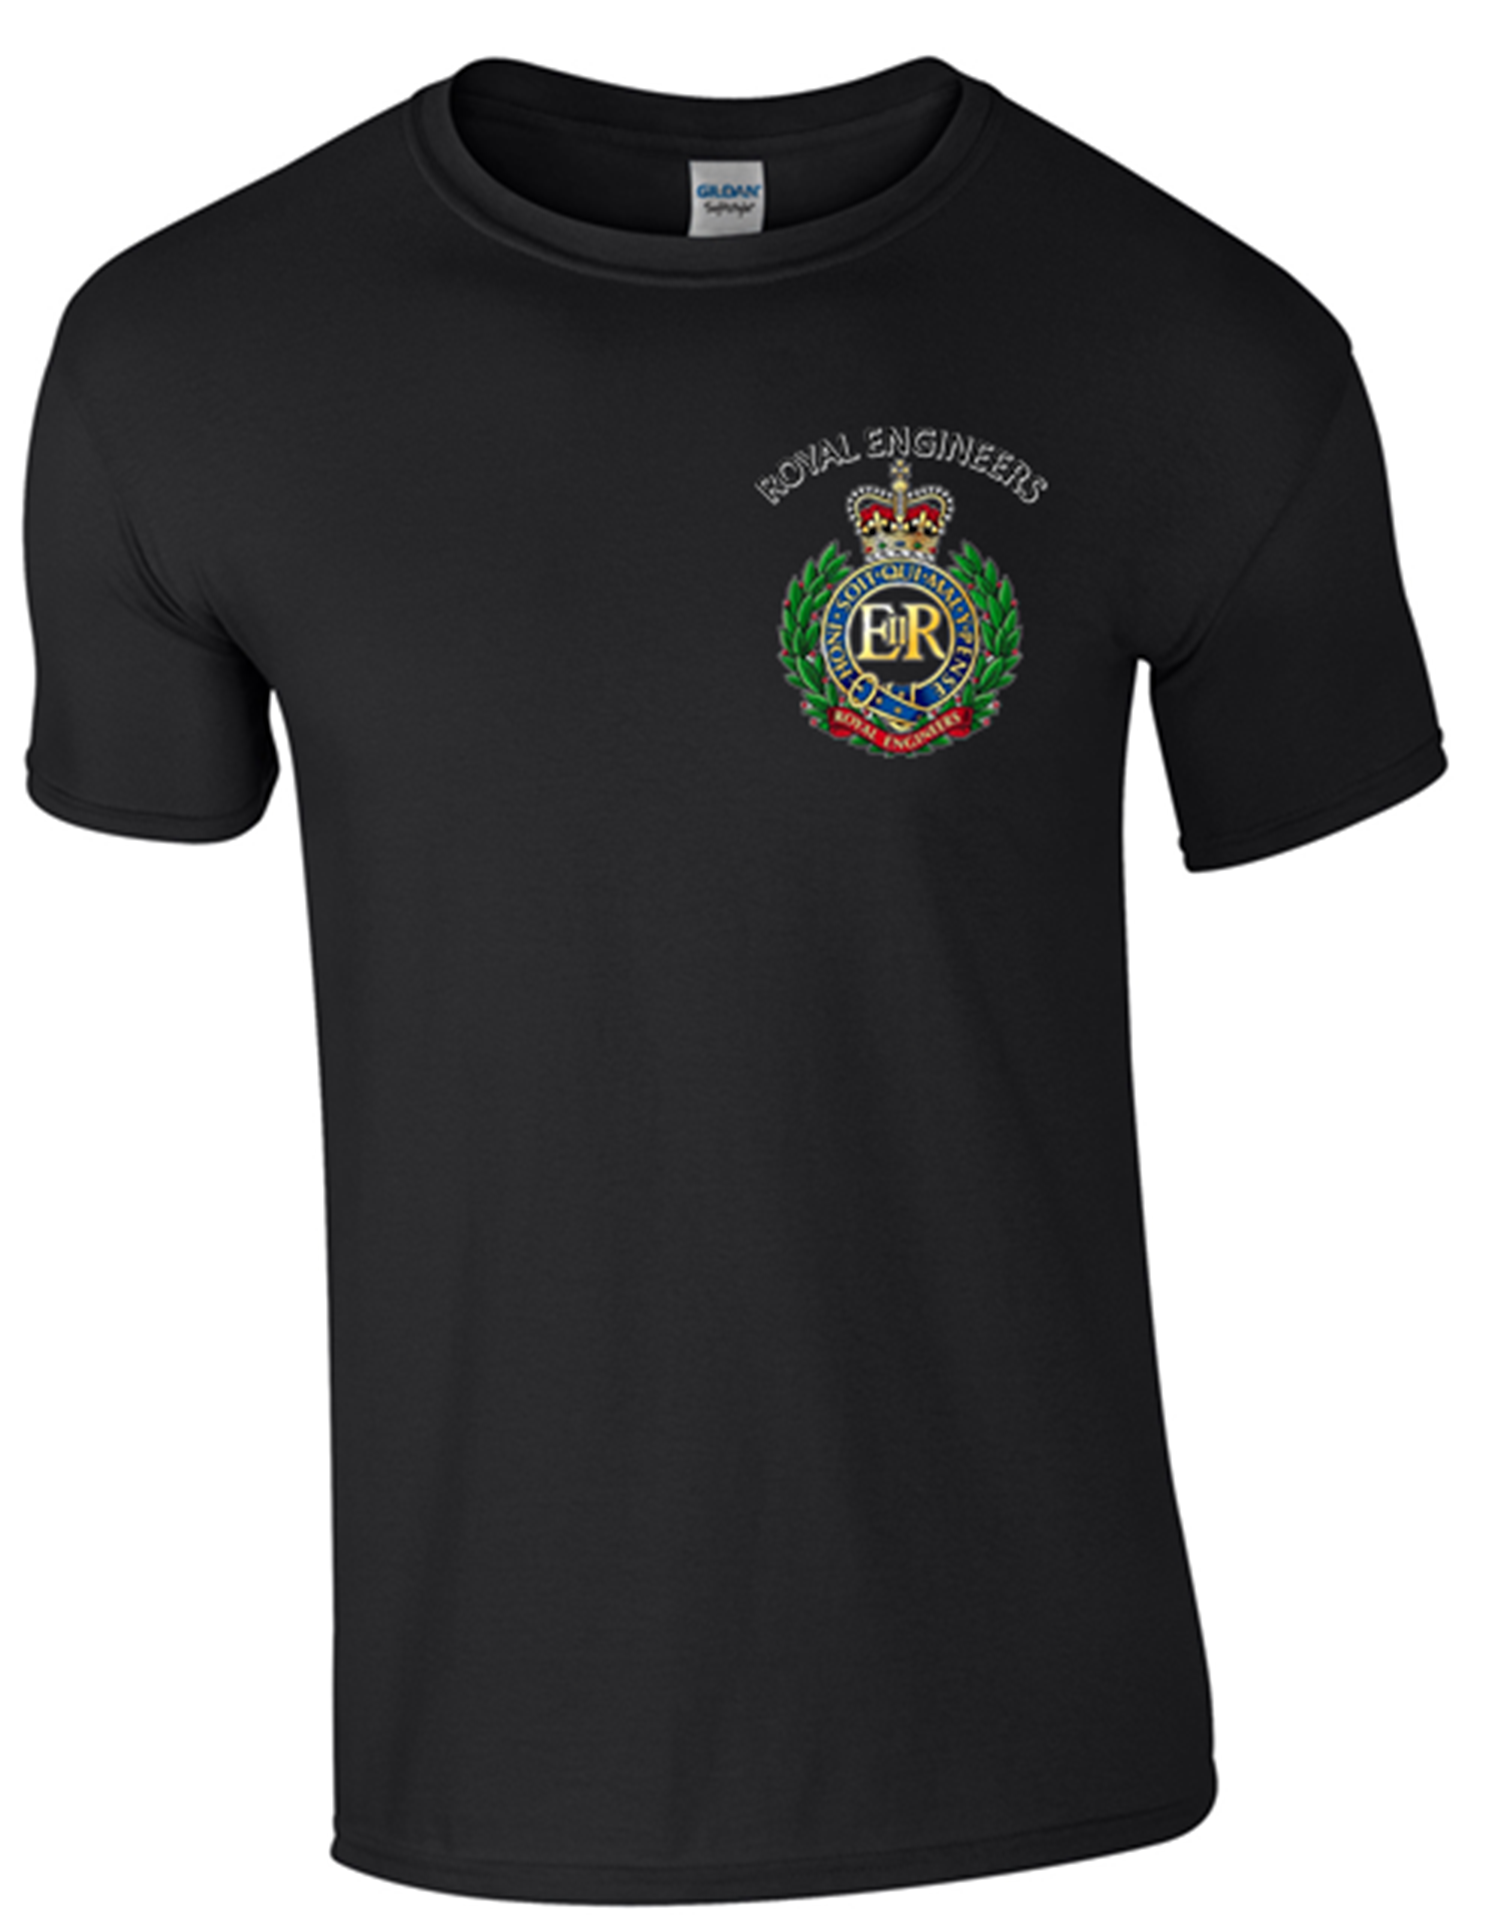 Ministry of Defence T-Shirt with Royal Engineers Front Only - Army 1157 kit S / BLACK Army 1157 Kit Veterans Owned Business